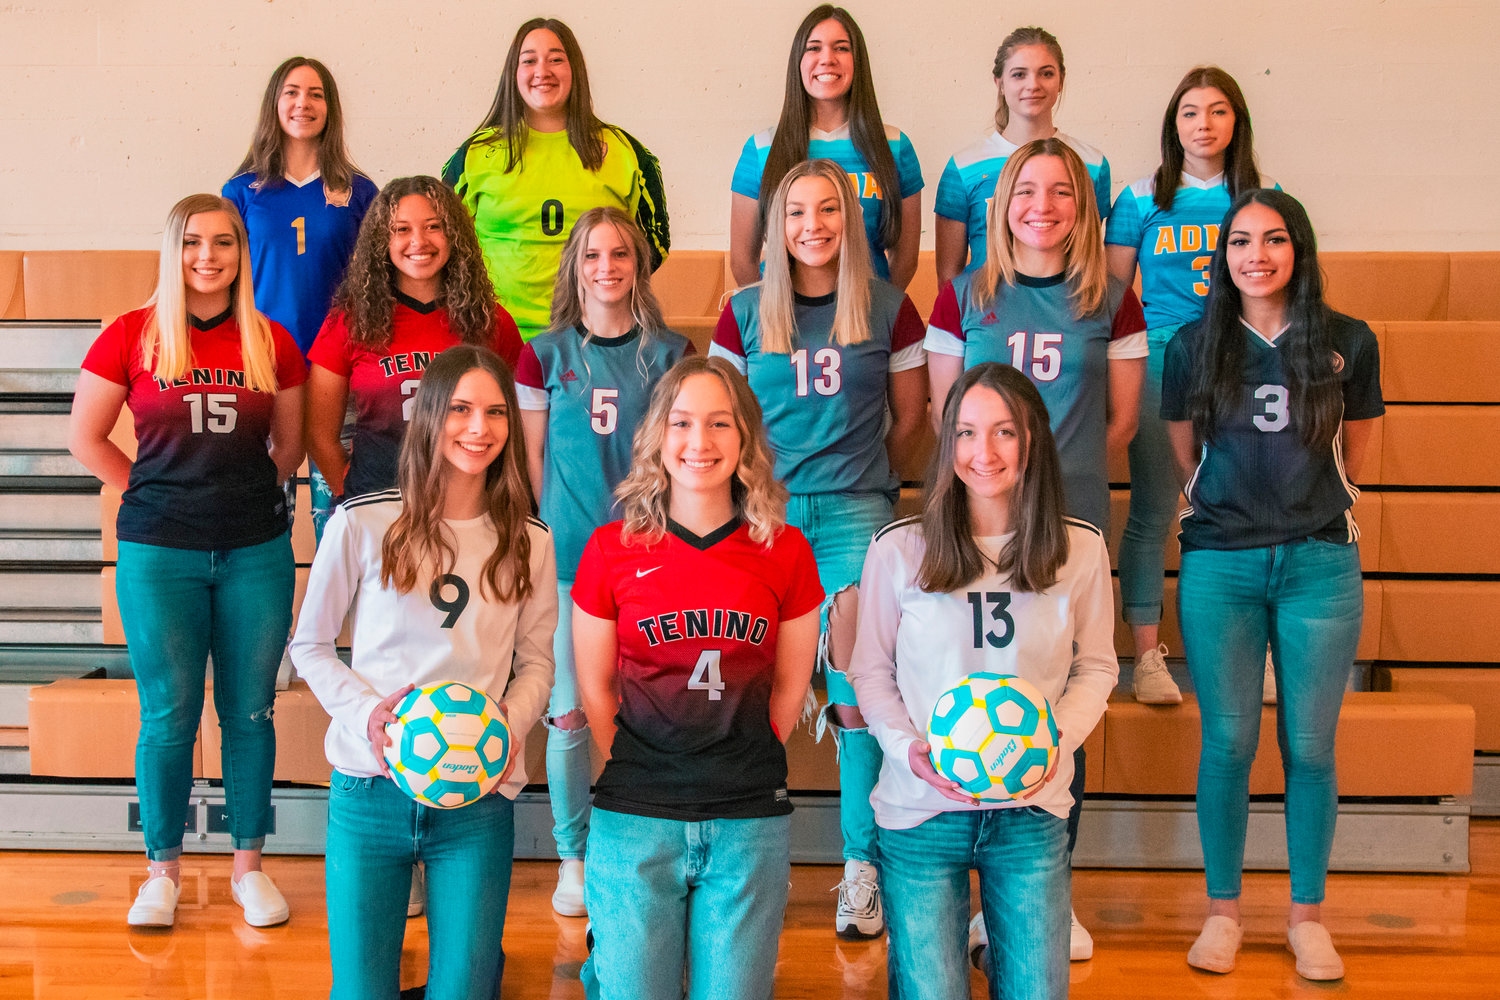 The Chronicle's 2021 All-Area Girls Soccer Team poses for photo in Centralia on Wednesday.